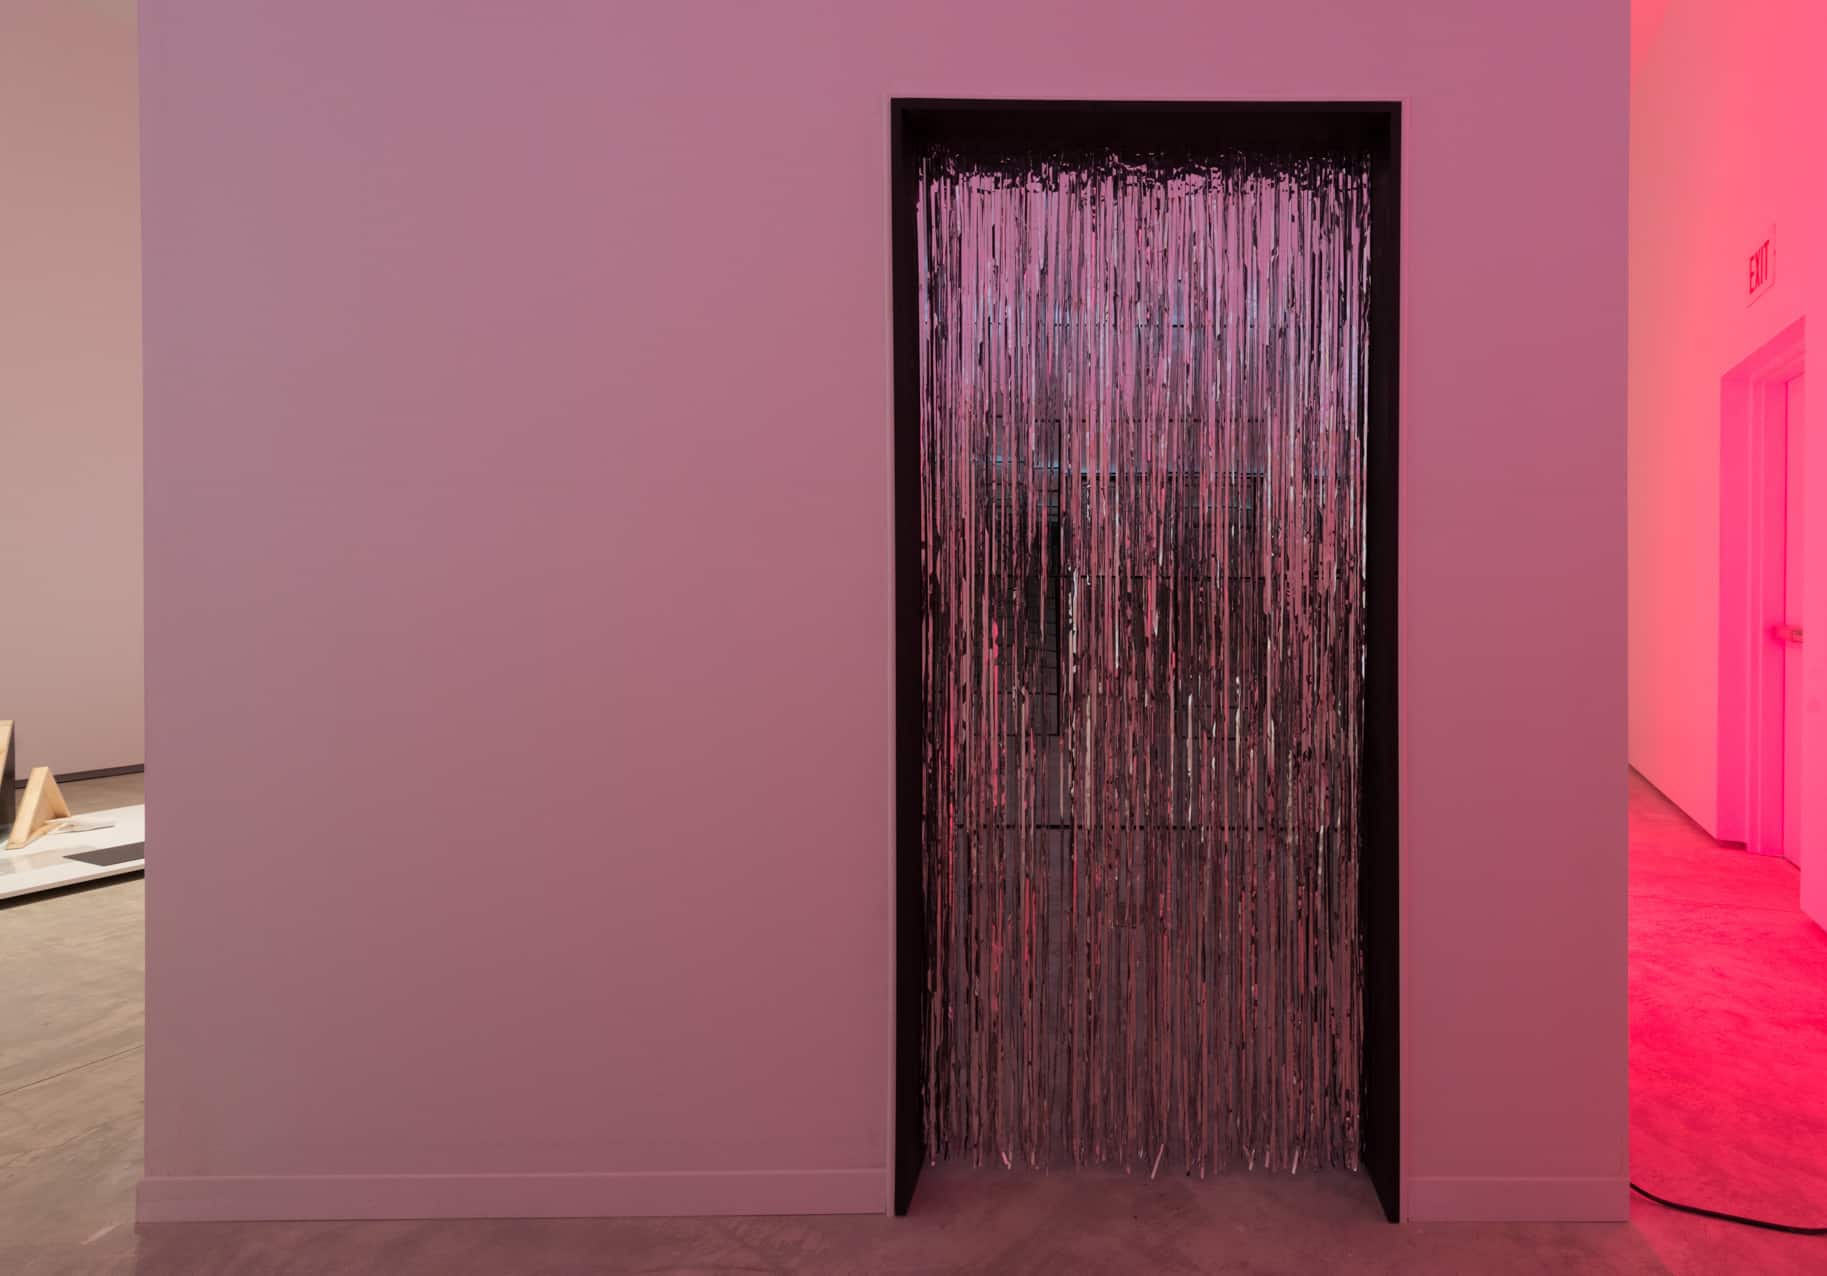 Installation image of the shiny tassled curtain doorway into Teresa Carlesimo and Michael DiRisio's artwork titled, "a form of formlessness."